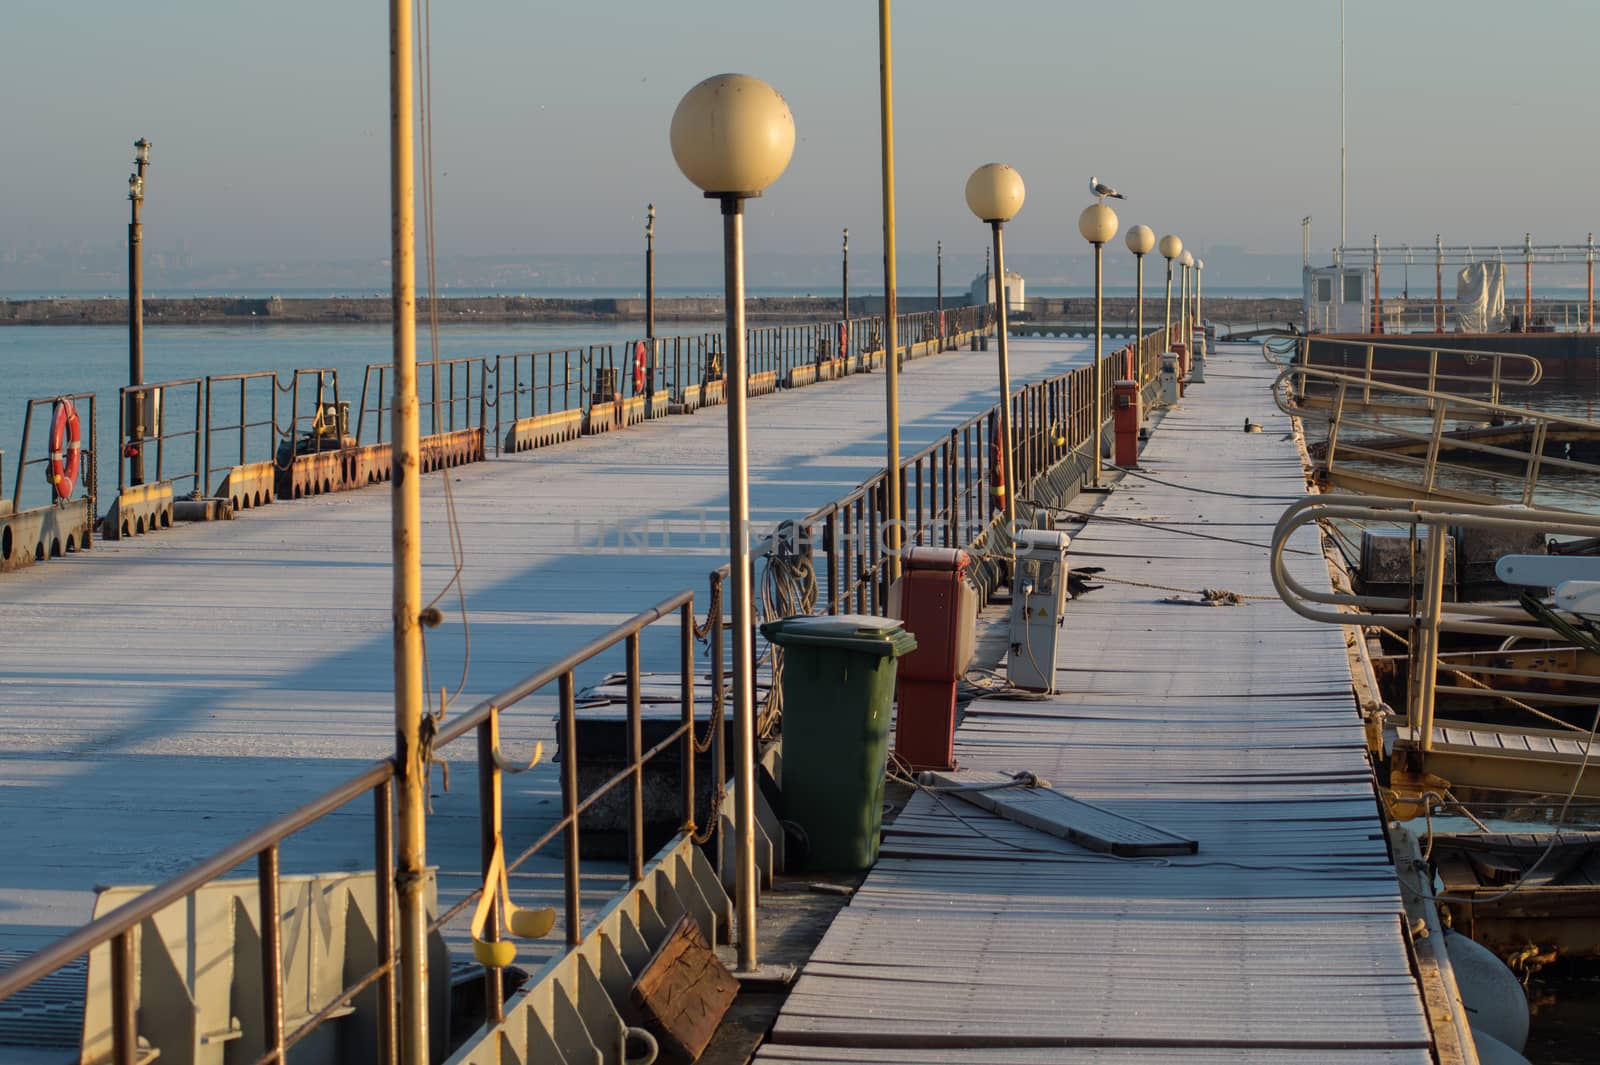 Pier in a Sunny Winter Day by Multipedia